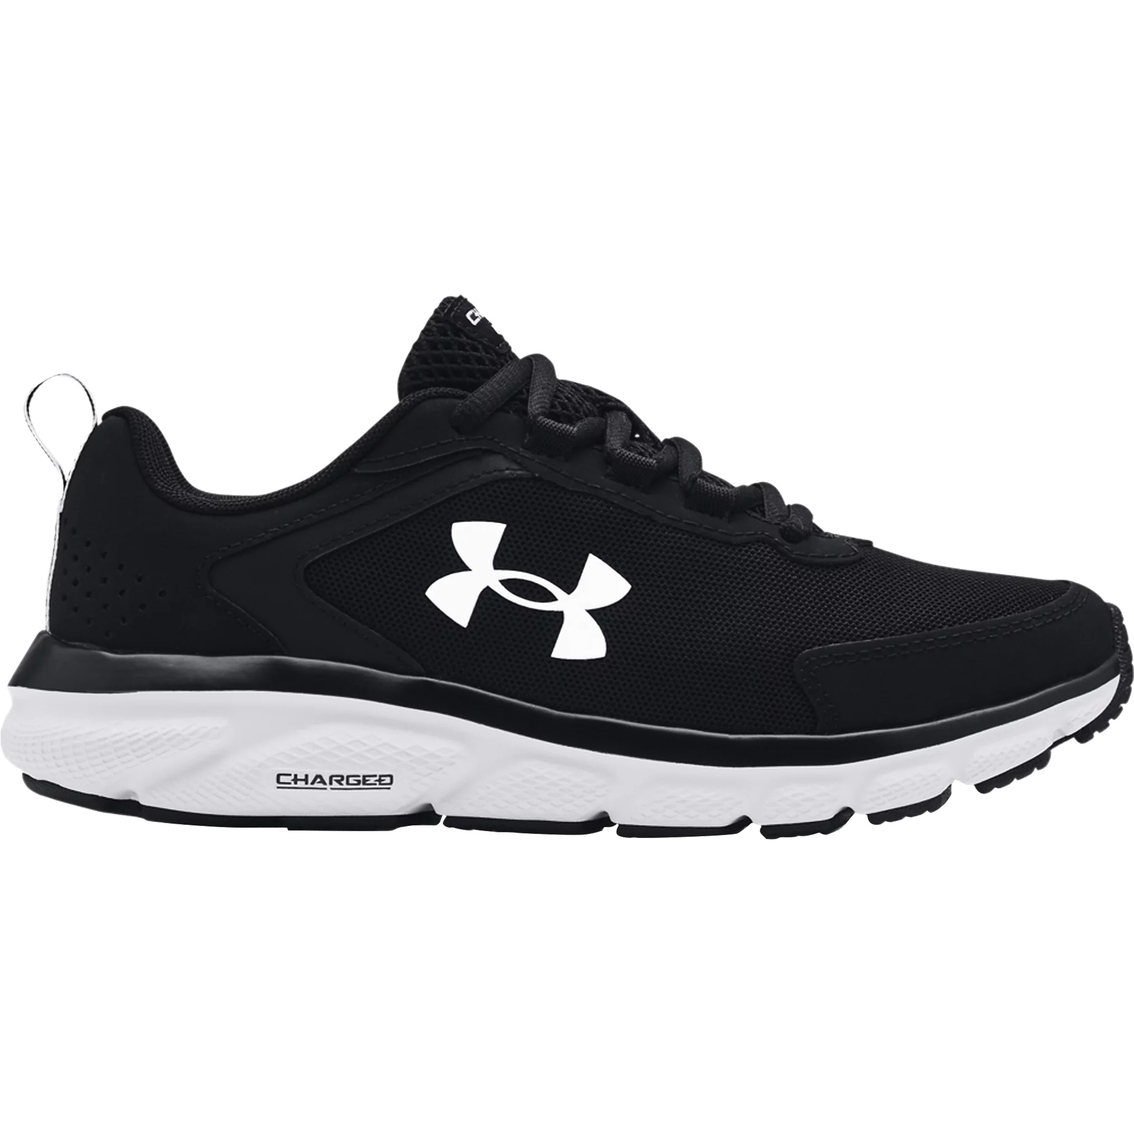 Under Armour Women's Charged Assert 9 Running Shoes | Women's Athletic ...